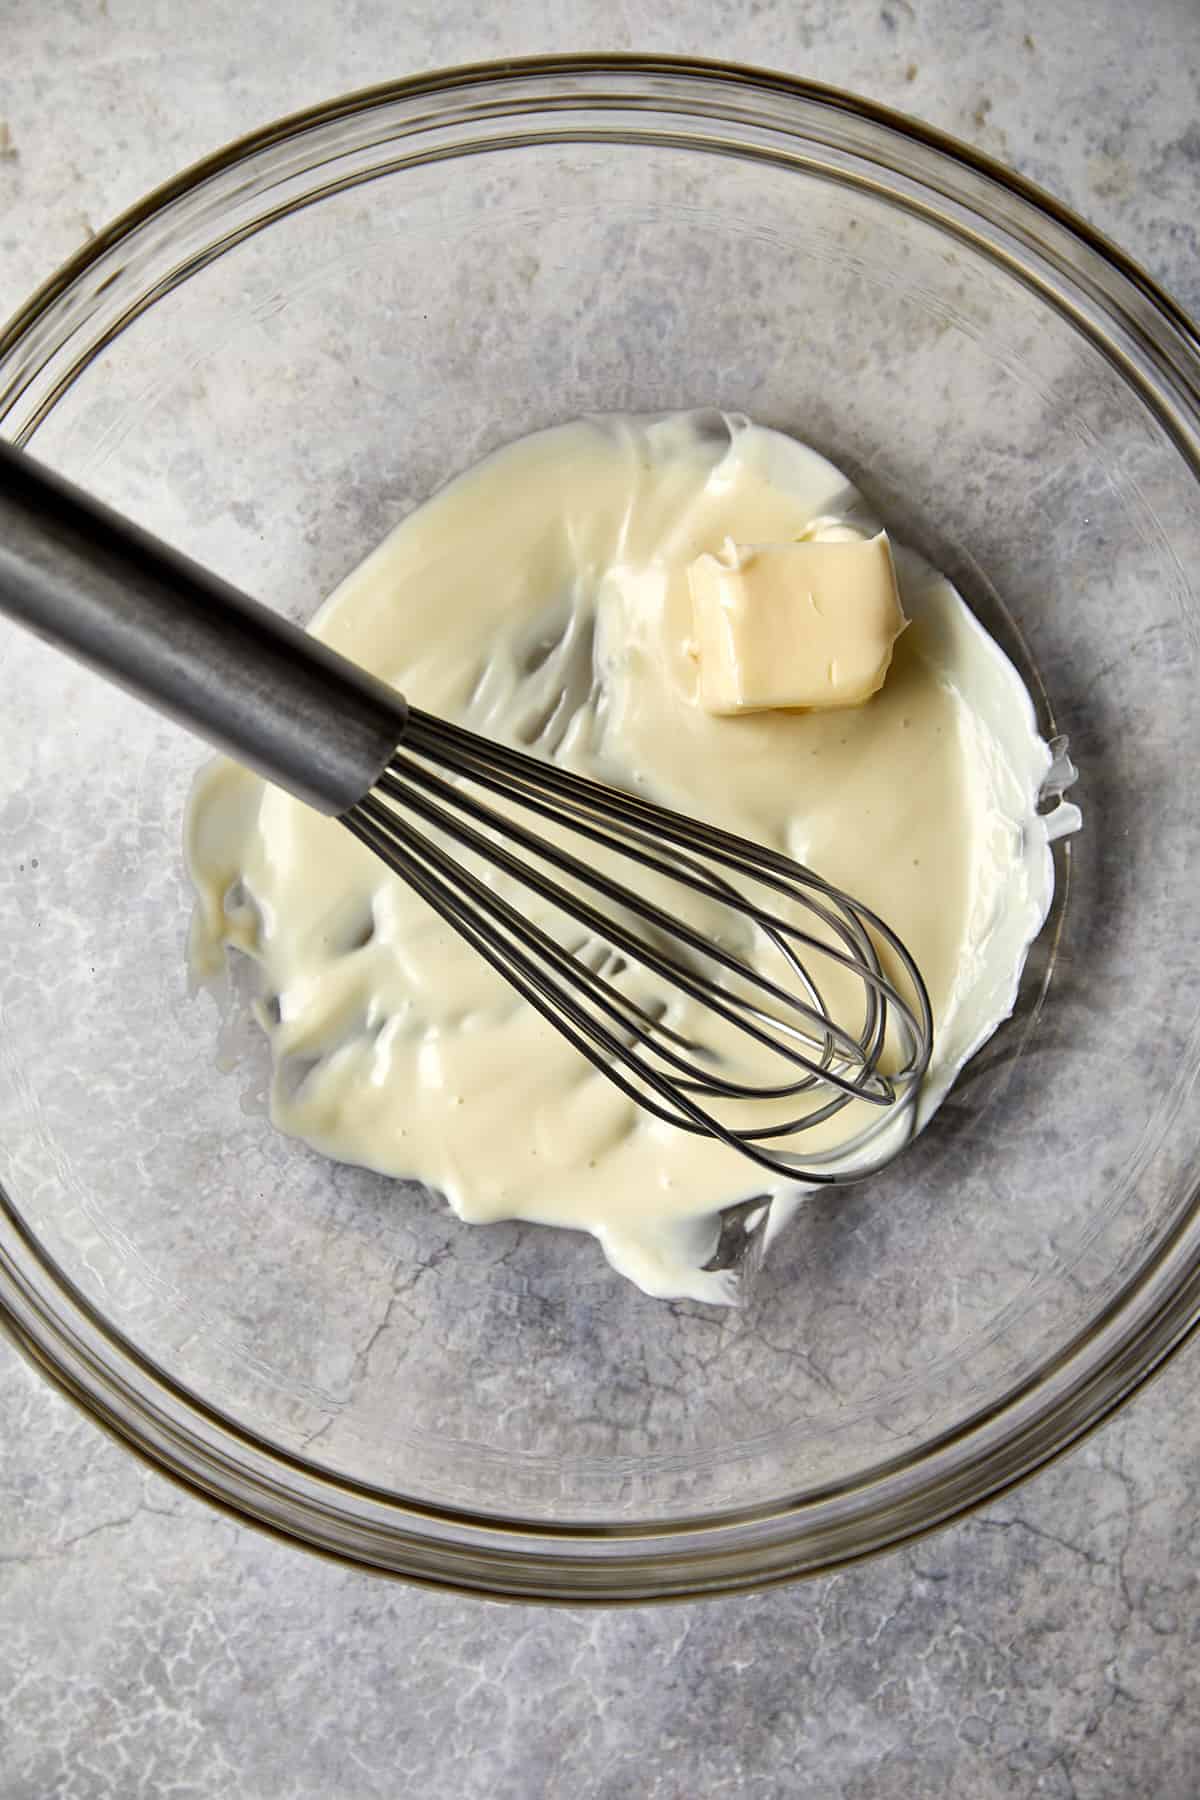 The image displays a clear glass bowl with a mixture of melted white chocolate and a piece of solid butter. A metal whisk is also laying in the bowl.